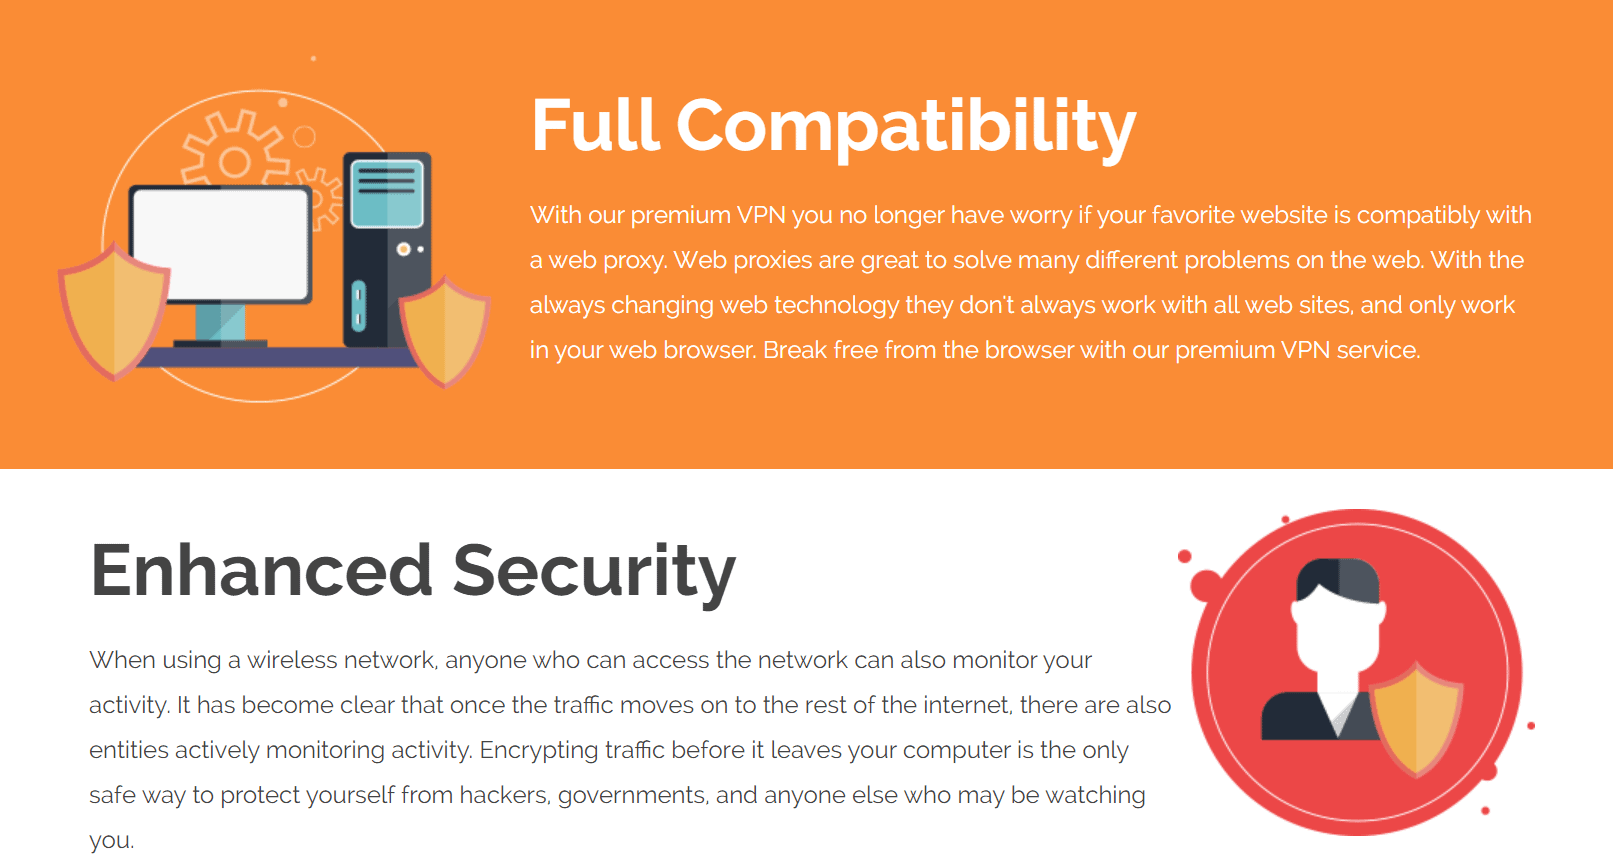 Security and Compatibility